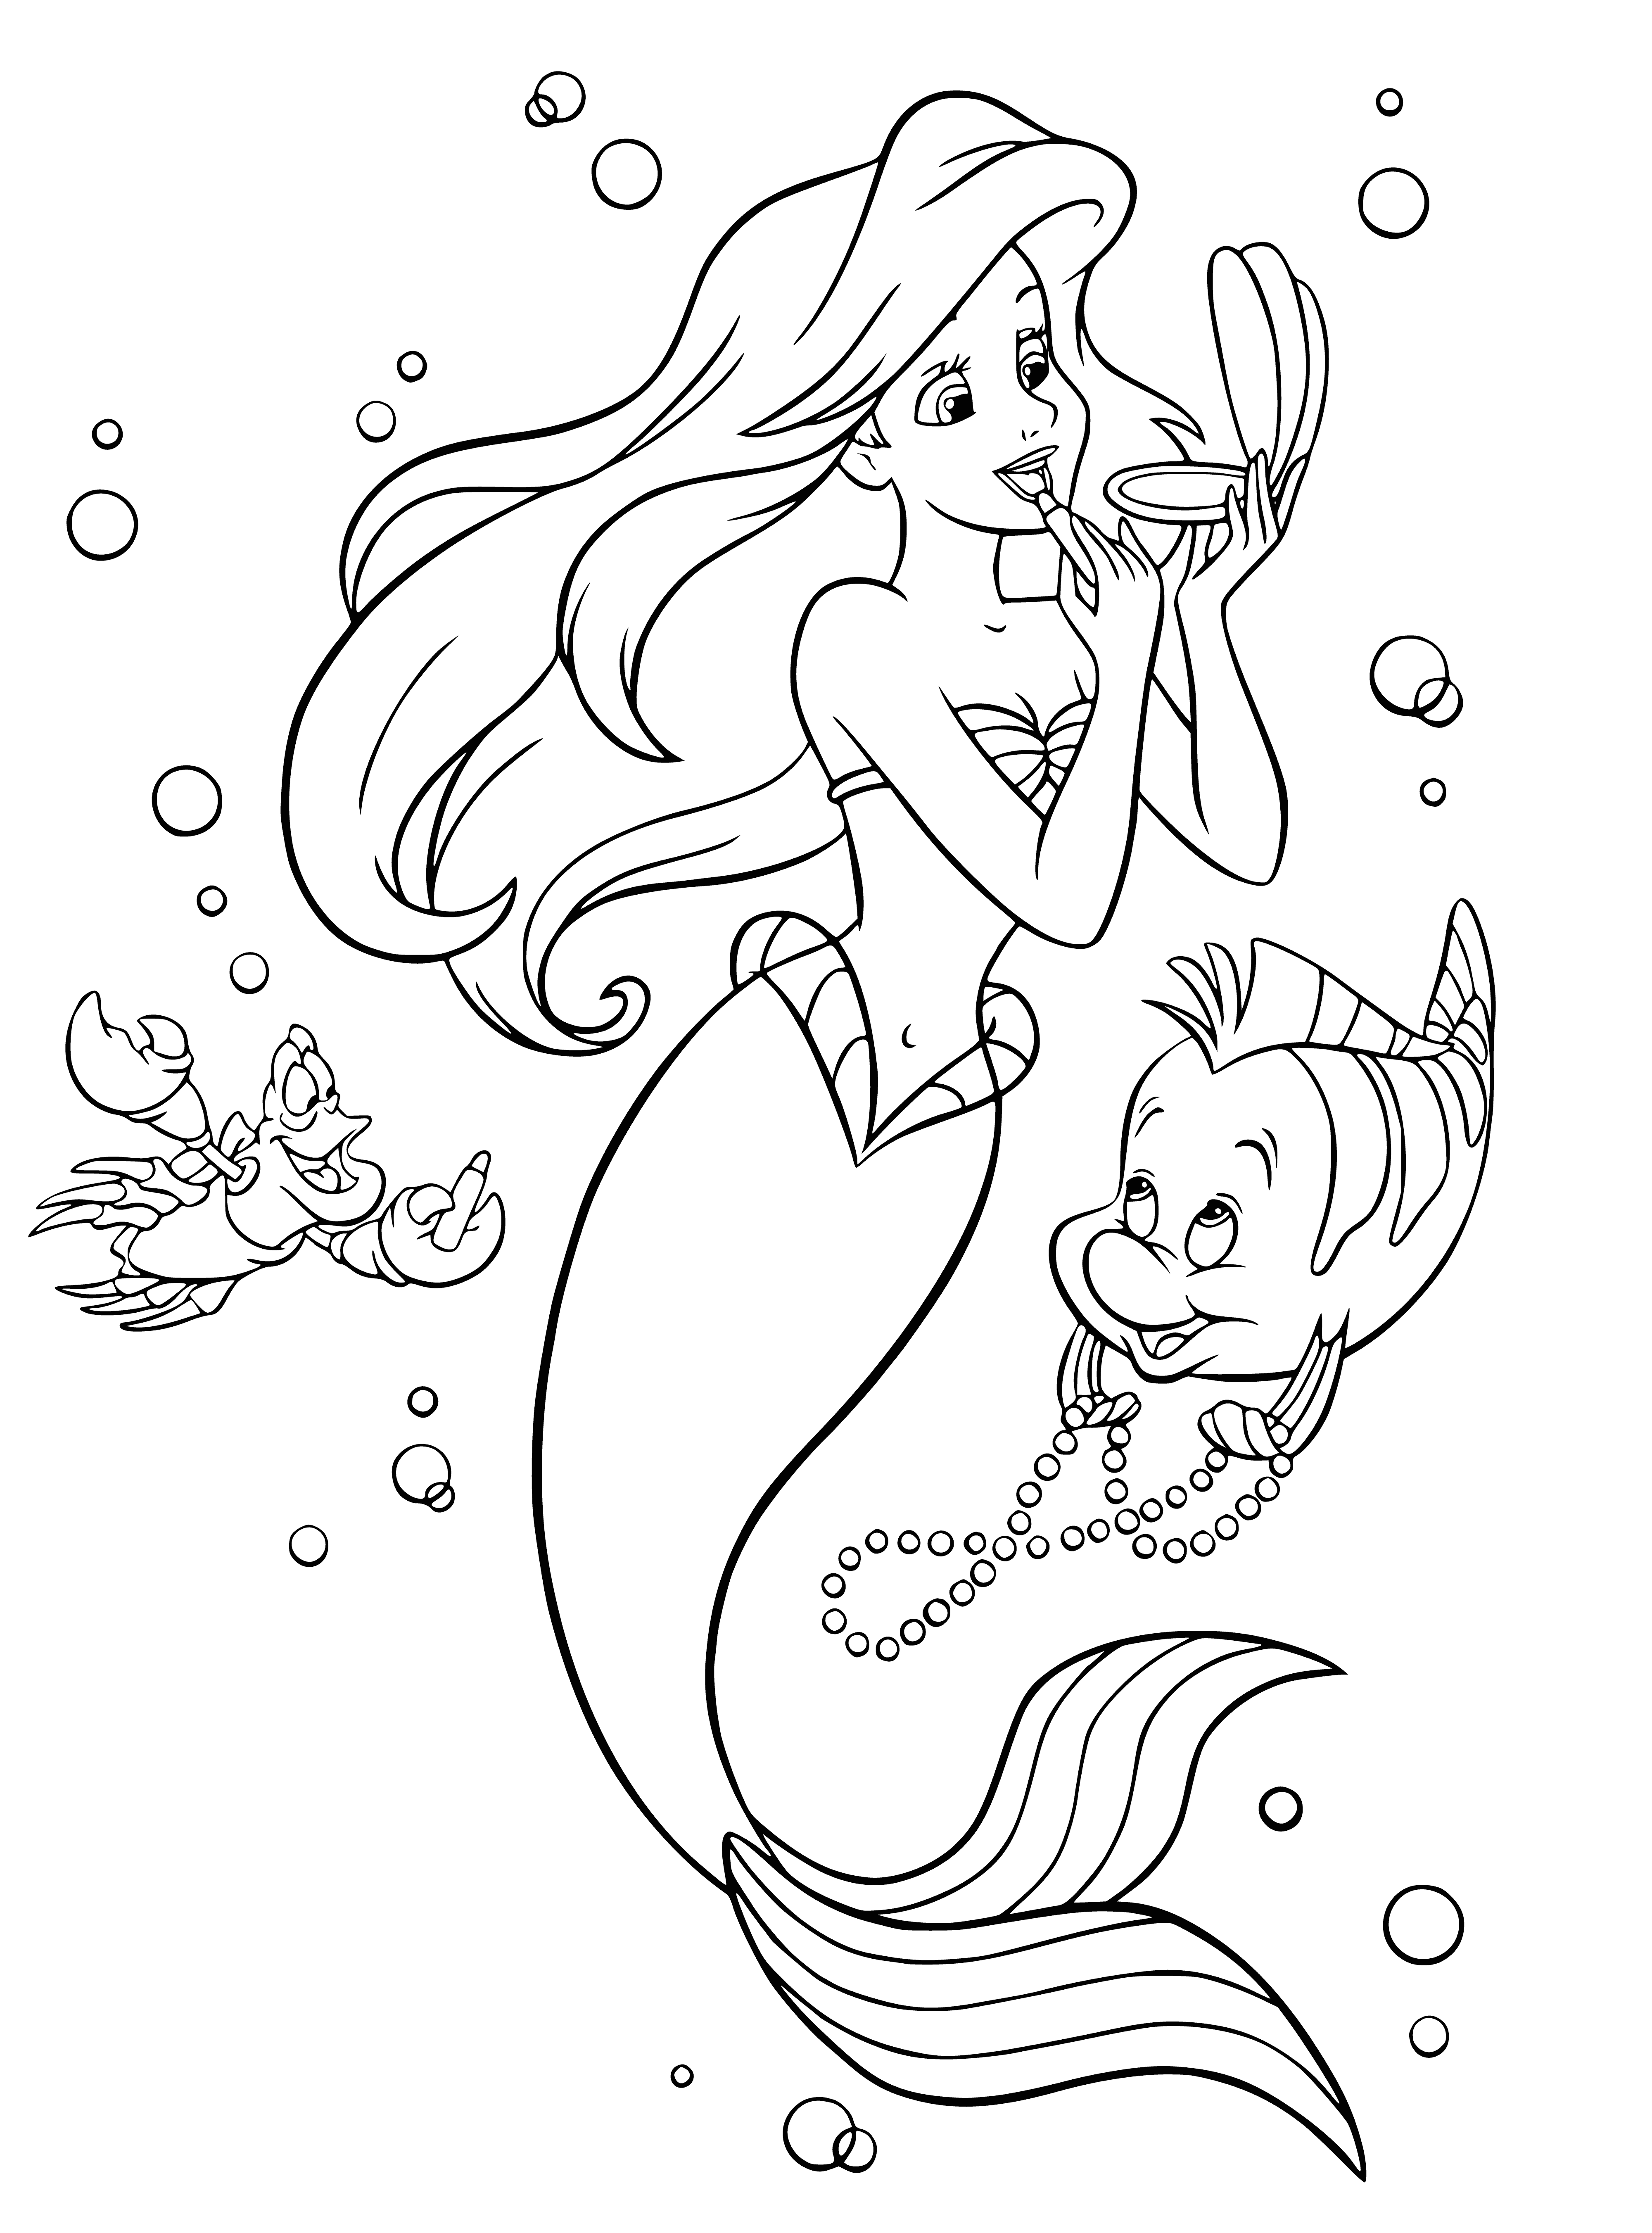 Ariel dress up coloring page